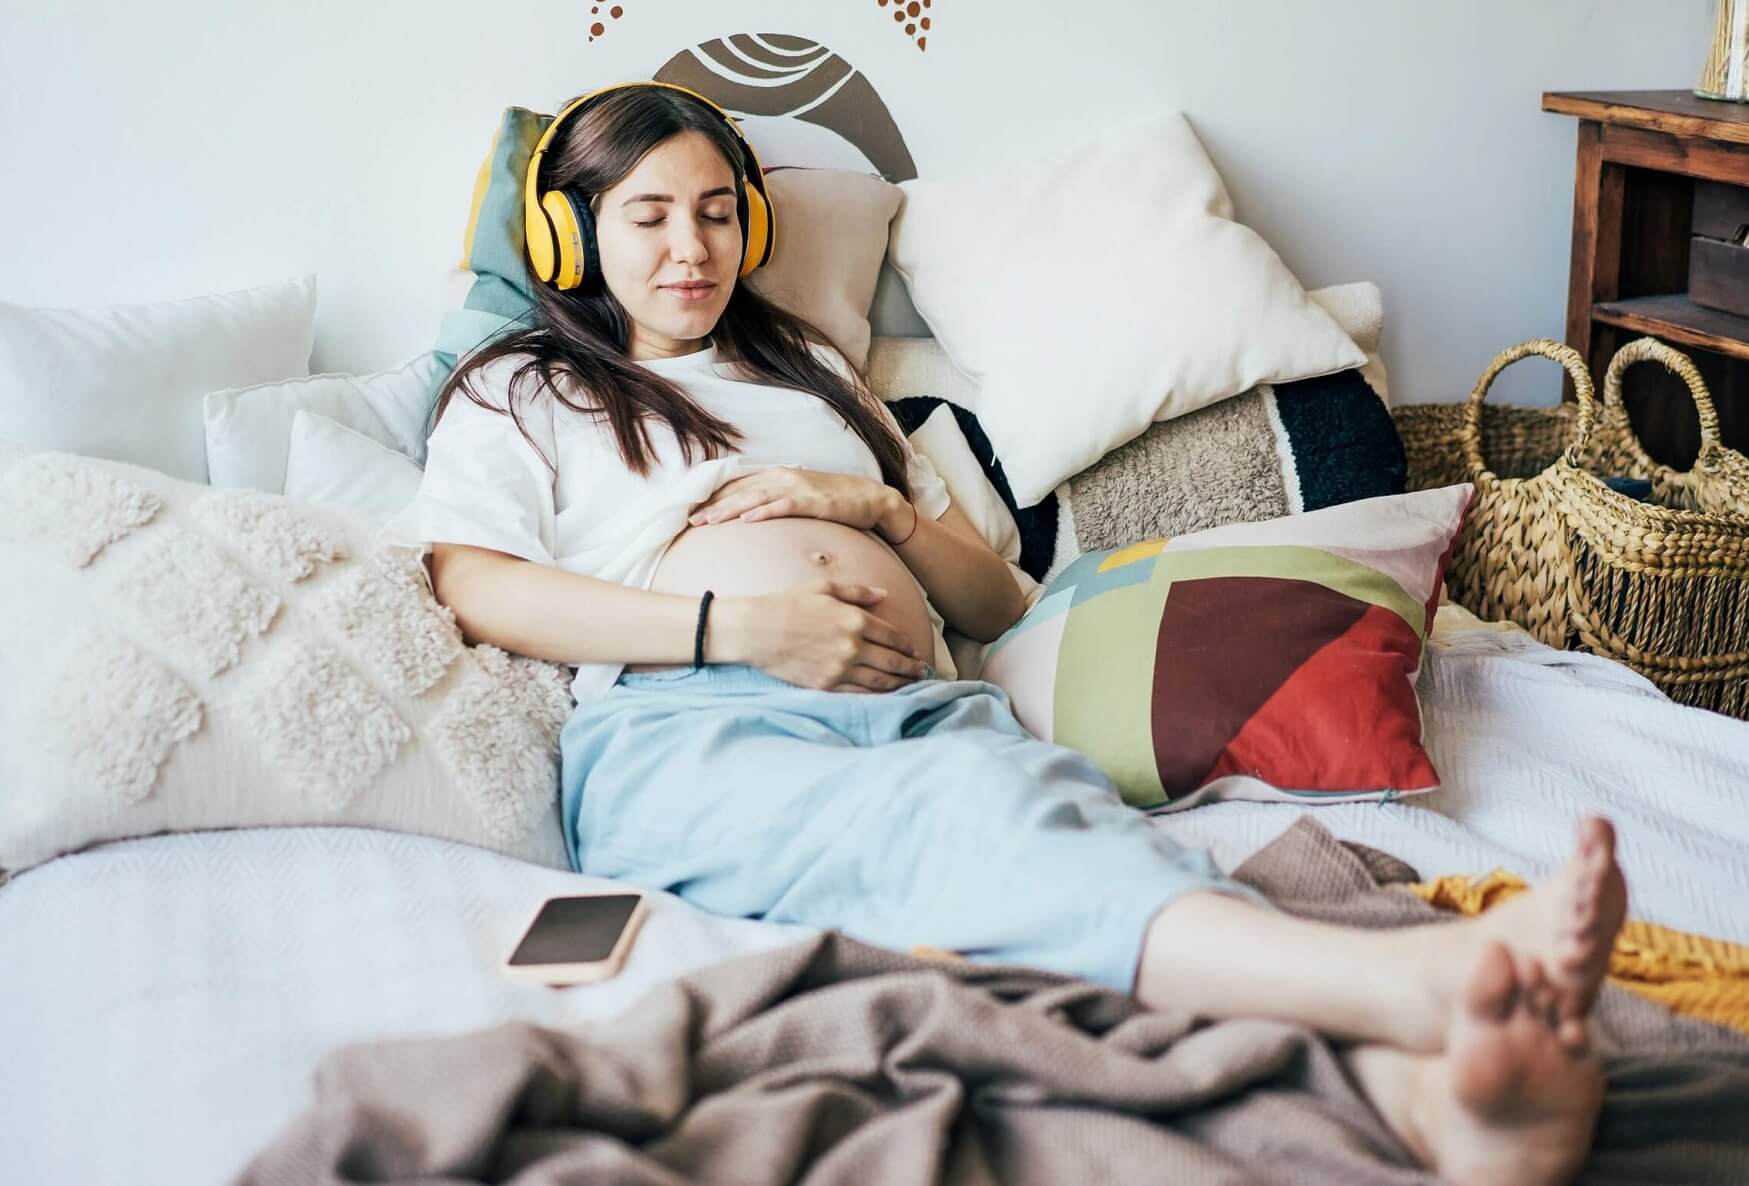 Mindful Pregnancy: 4 Relaxing Guided Meditations for Pregnant Women